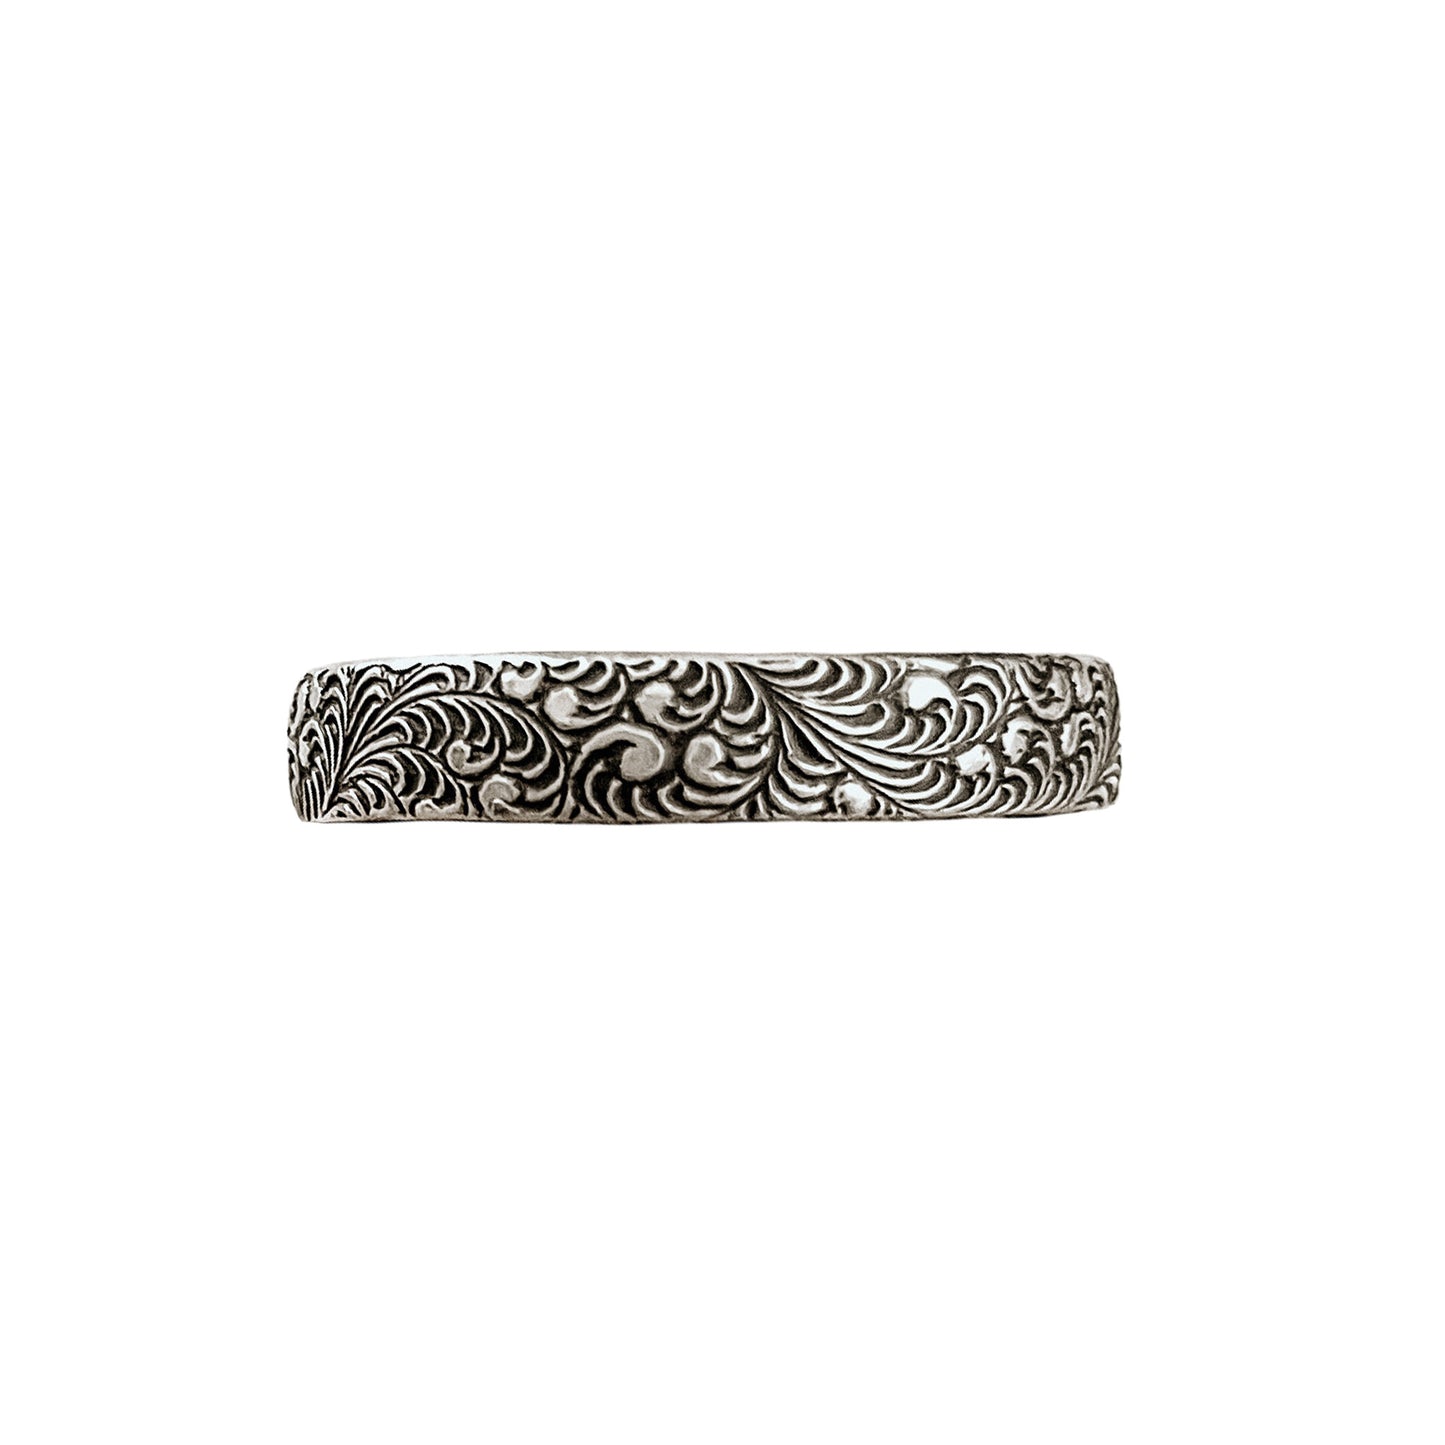 Feathered Sterling Silver Stacking Ring shown in antiqued finish.